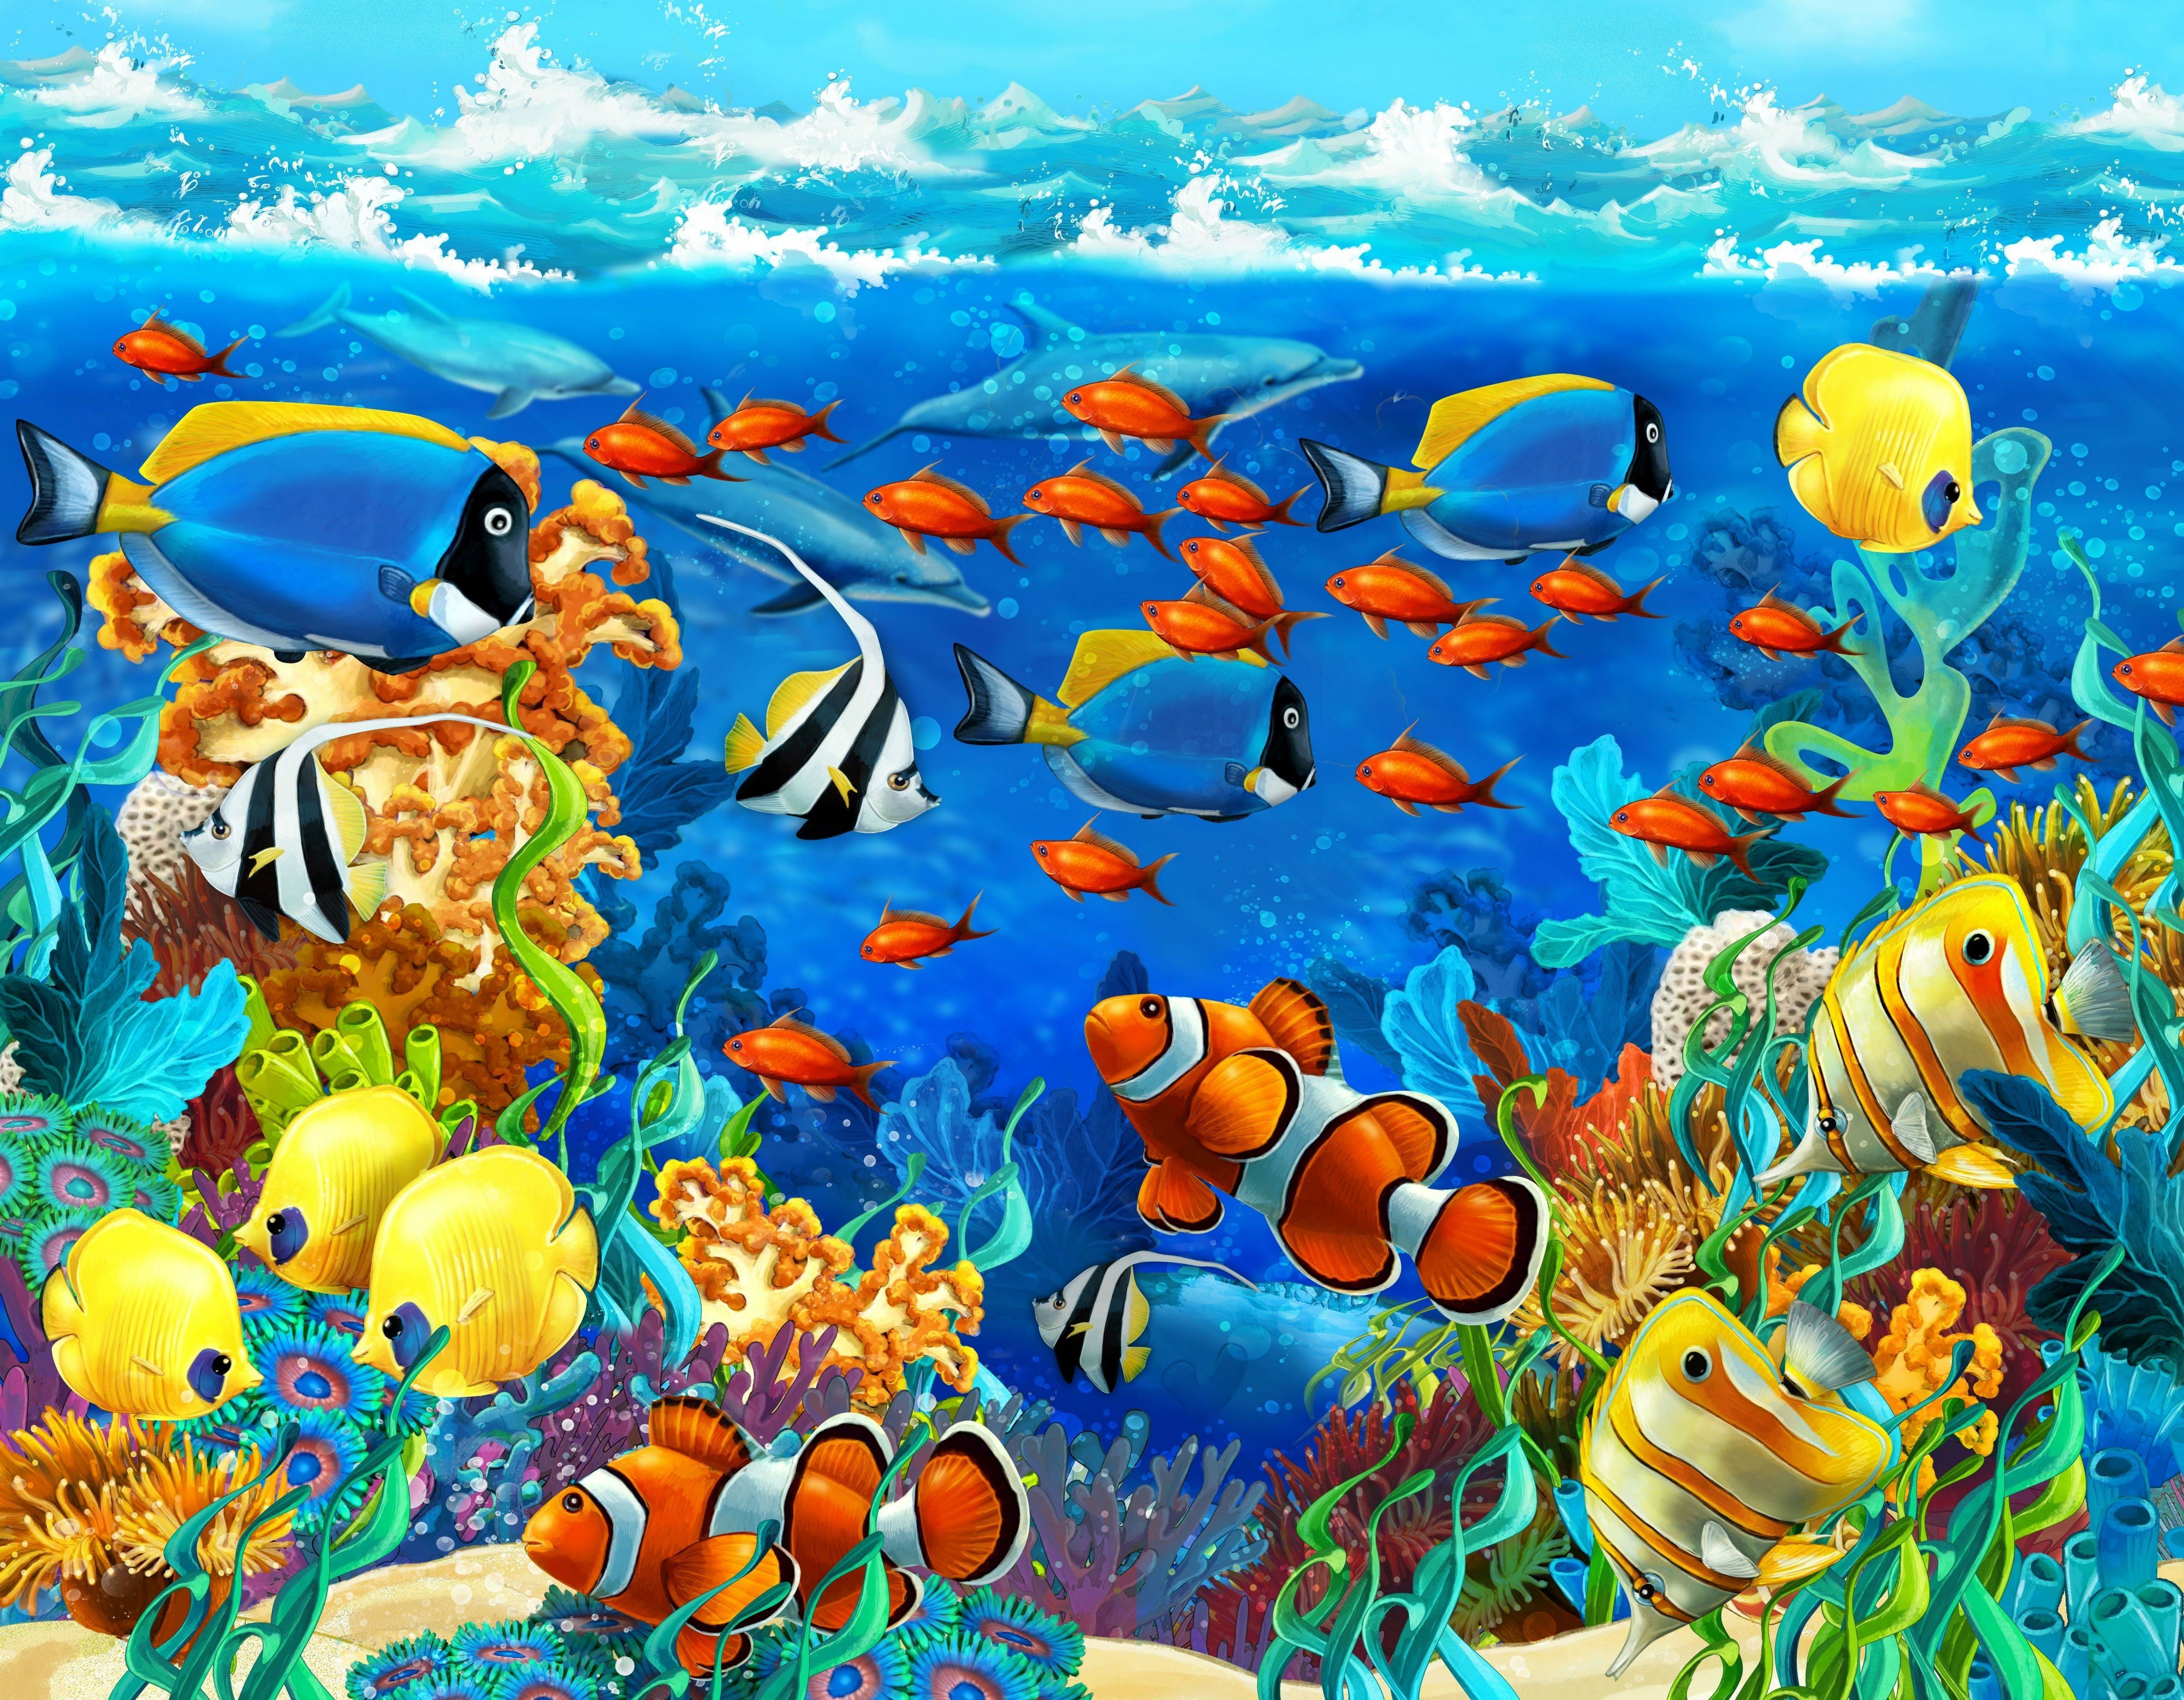 Dolphin, Sea, Seabed, Fish, Corals, Underwater, Ocean